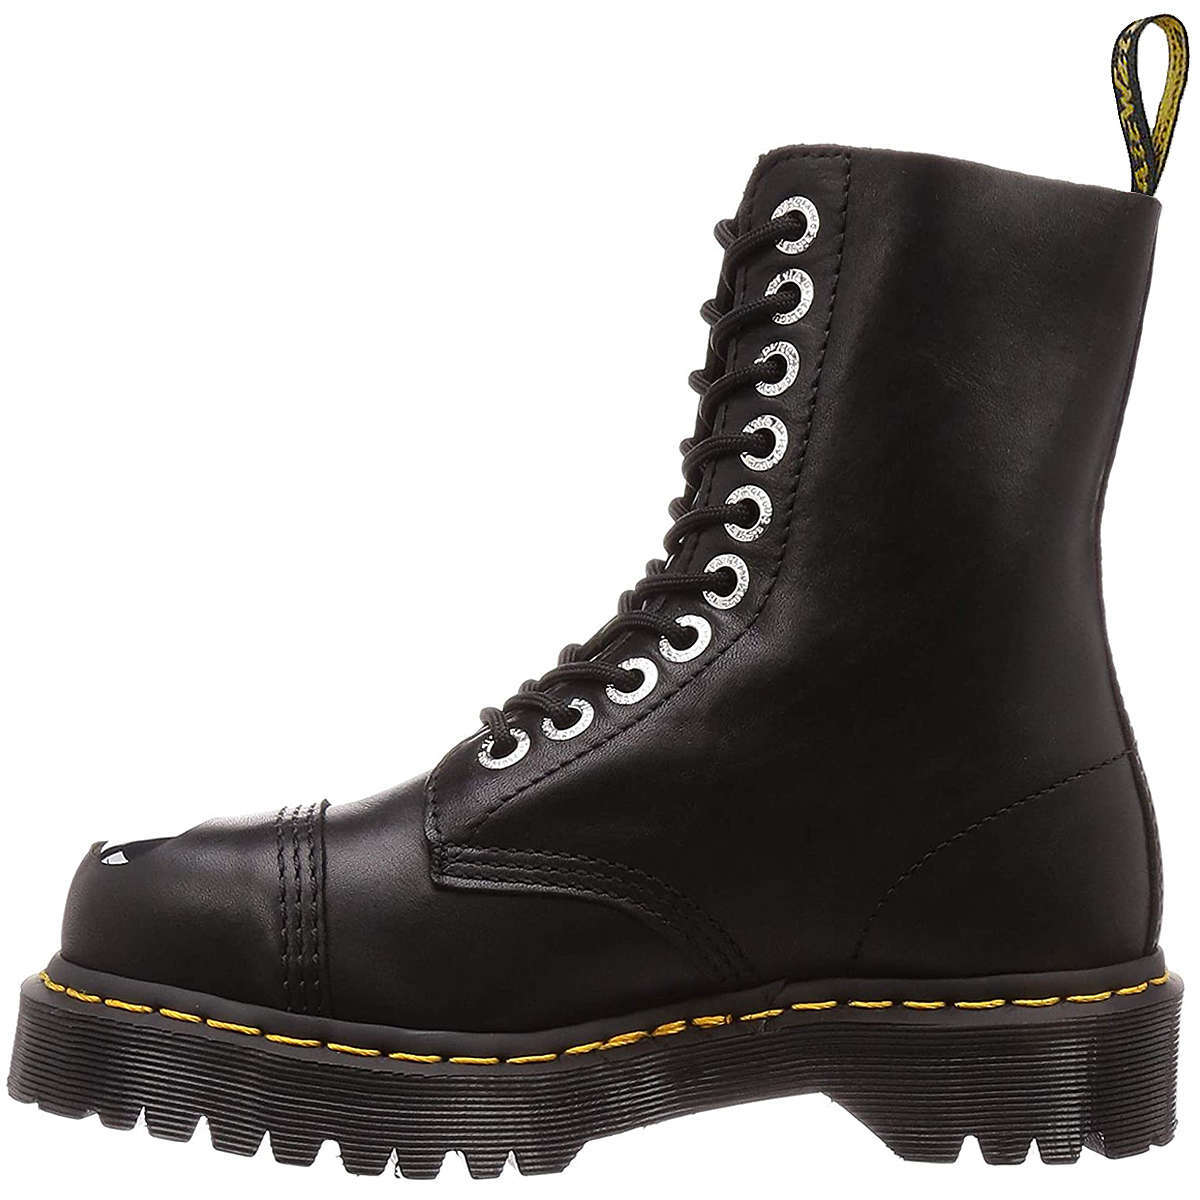 Dr.Martens 8761 BXB BOOT(10966001 厚底)10ホールブーツ